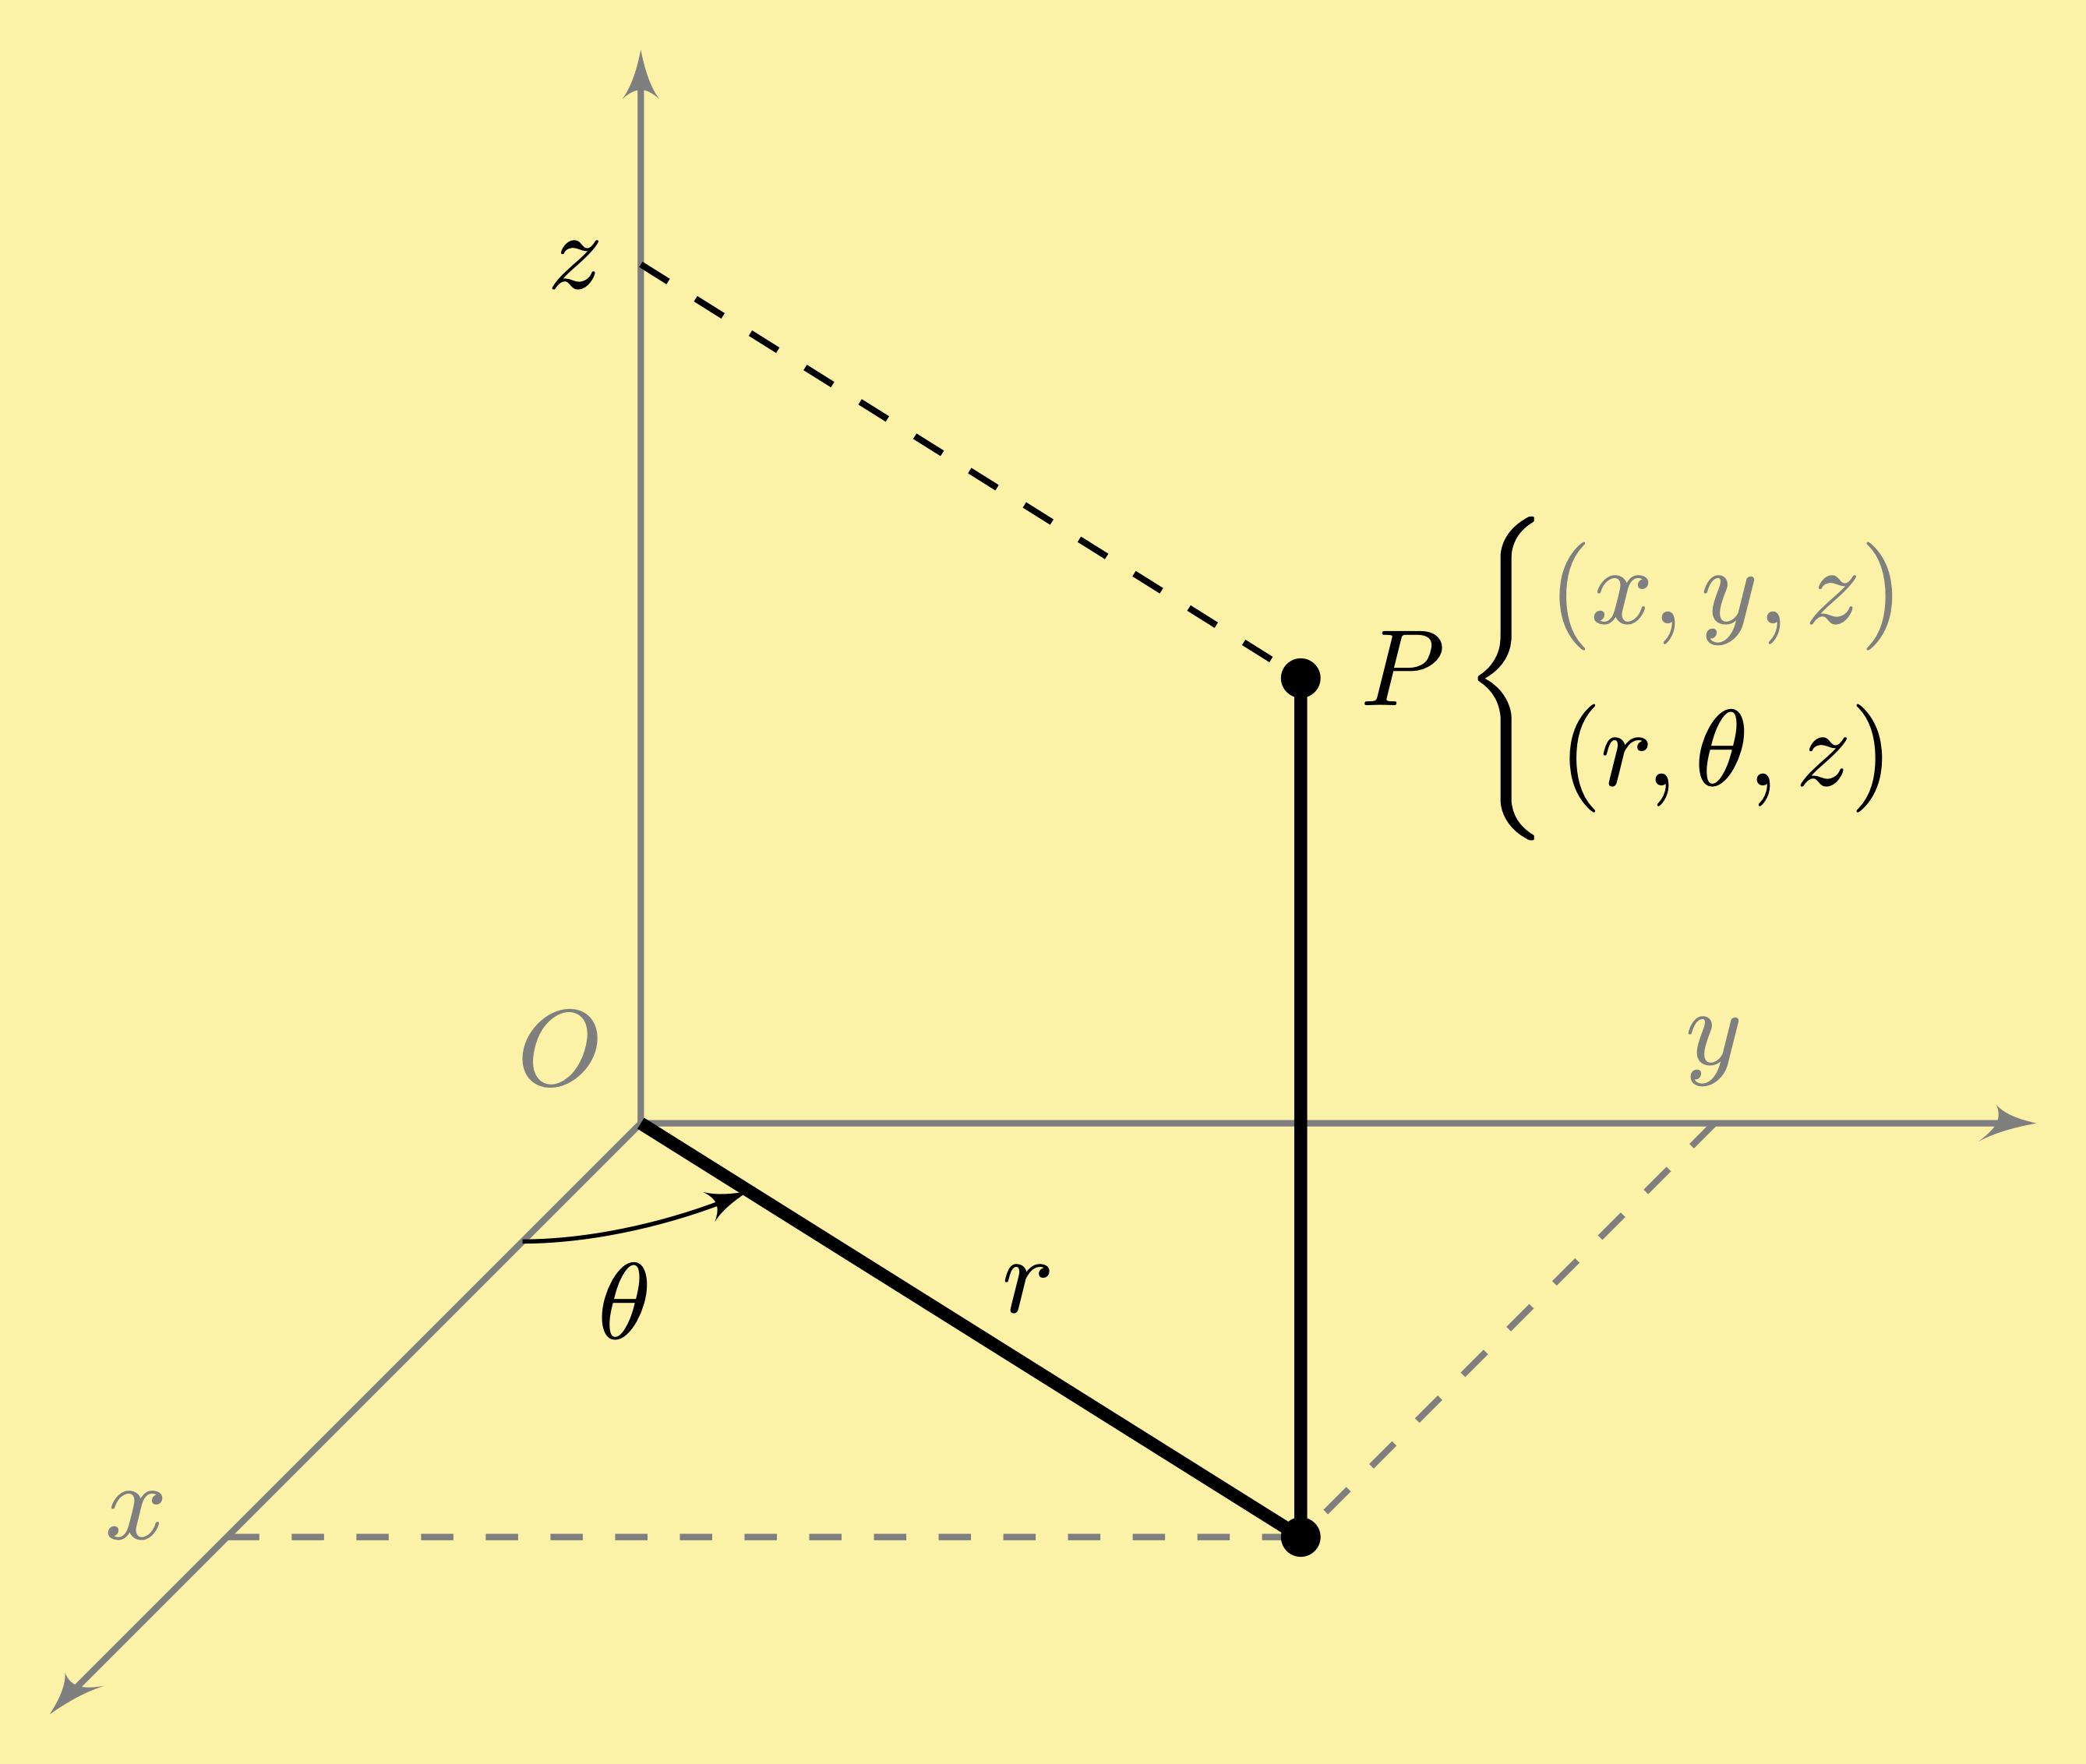 plane vector normal 3-space coordinate system xyz R3 Cartesian three-space